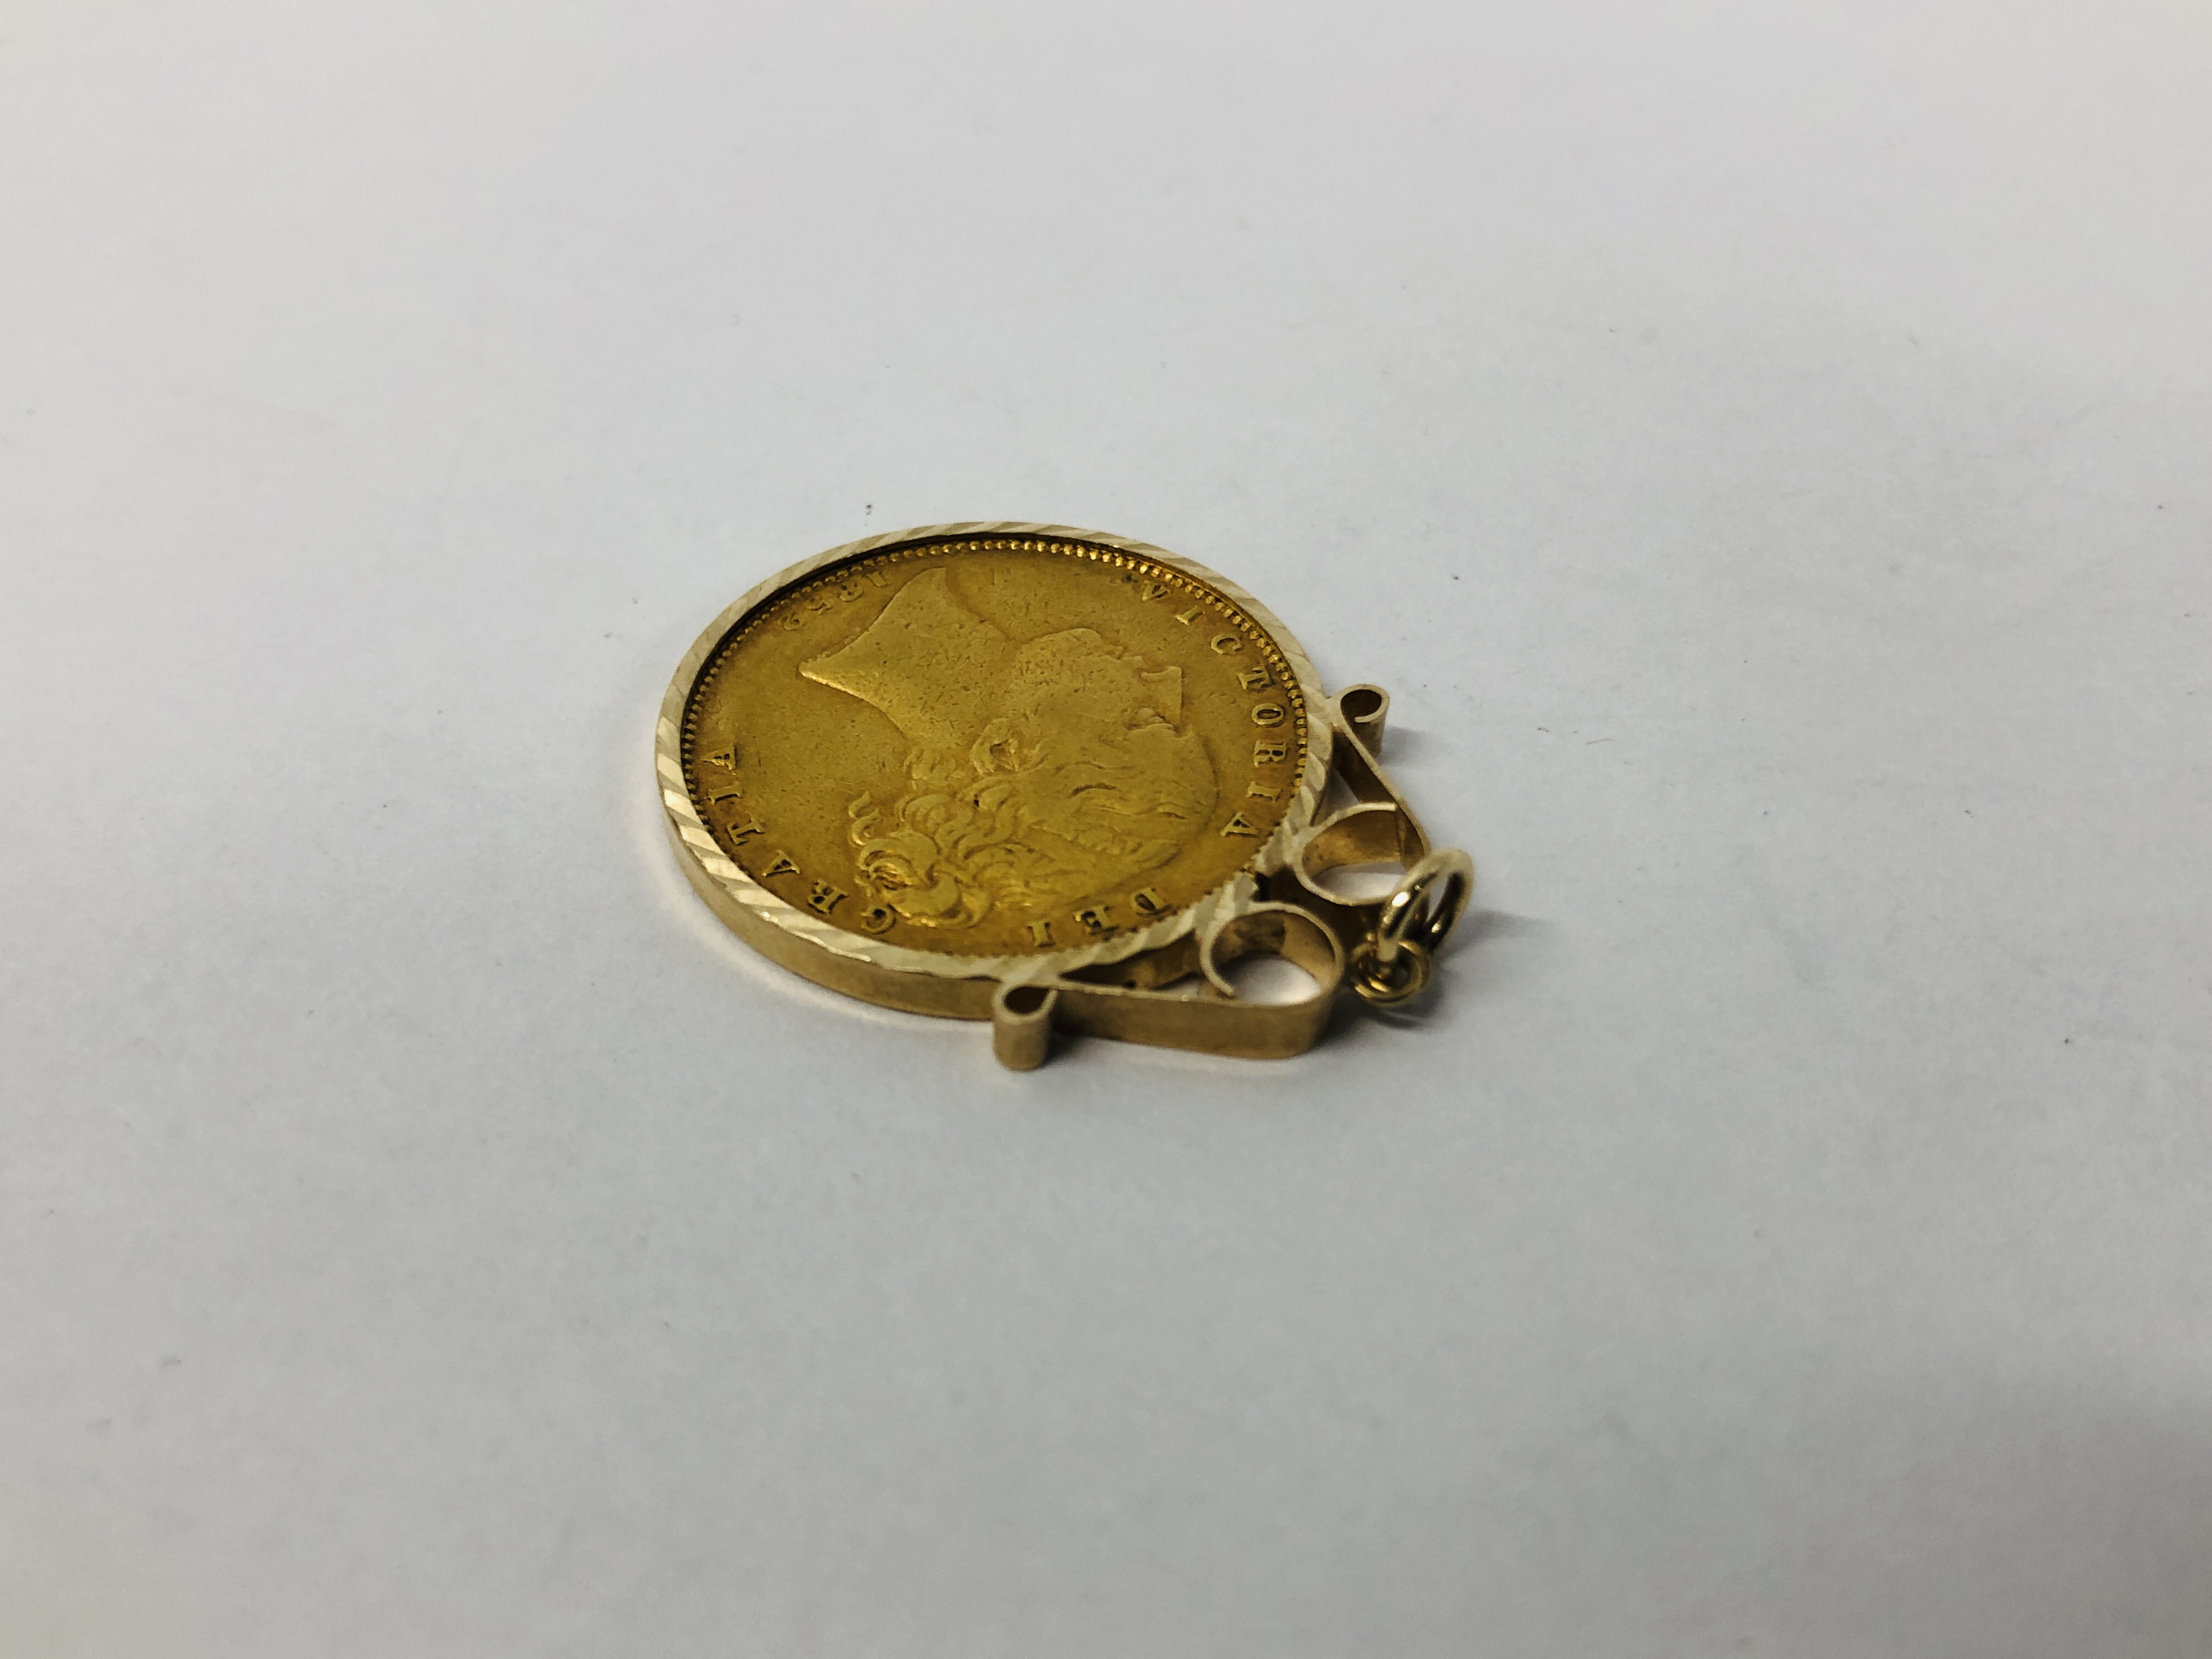 1852 GOLD SOVEREIGN - VICTORIA YOUNG HEAD SHIELD BACK LONDON IN 9CT GOLD PENDANT MOUNT. - Image 3 of 7